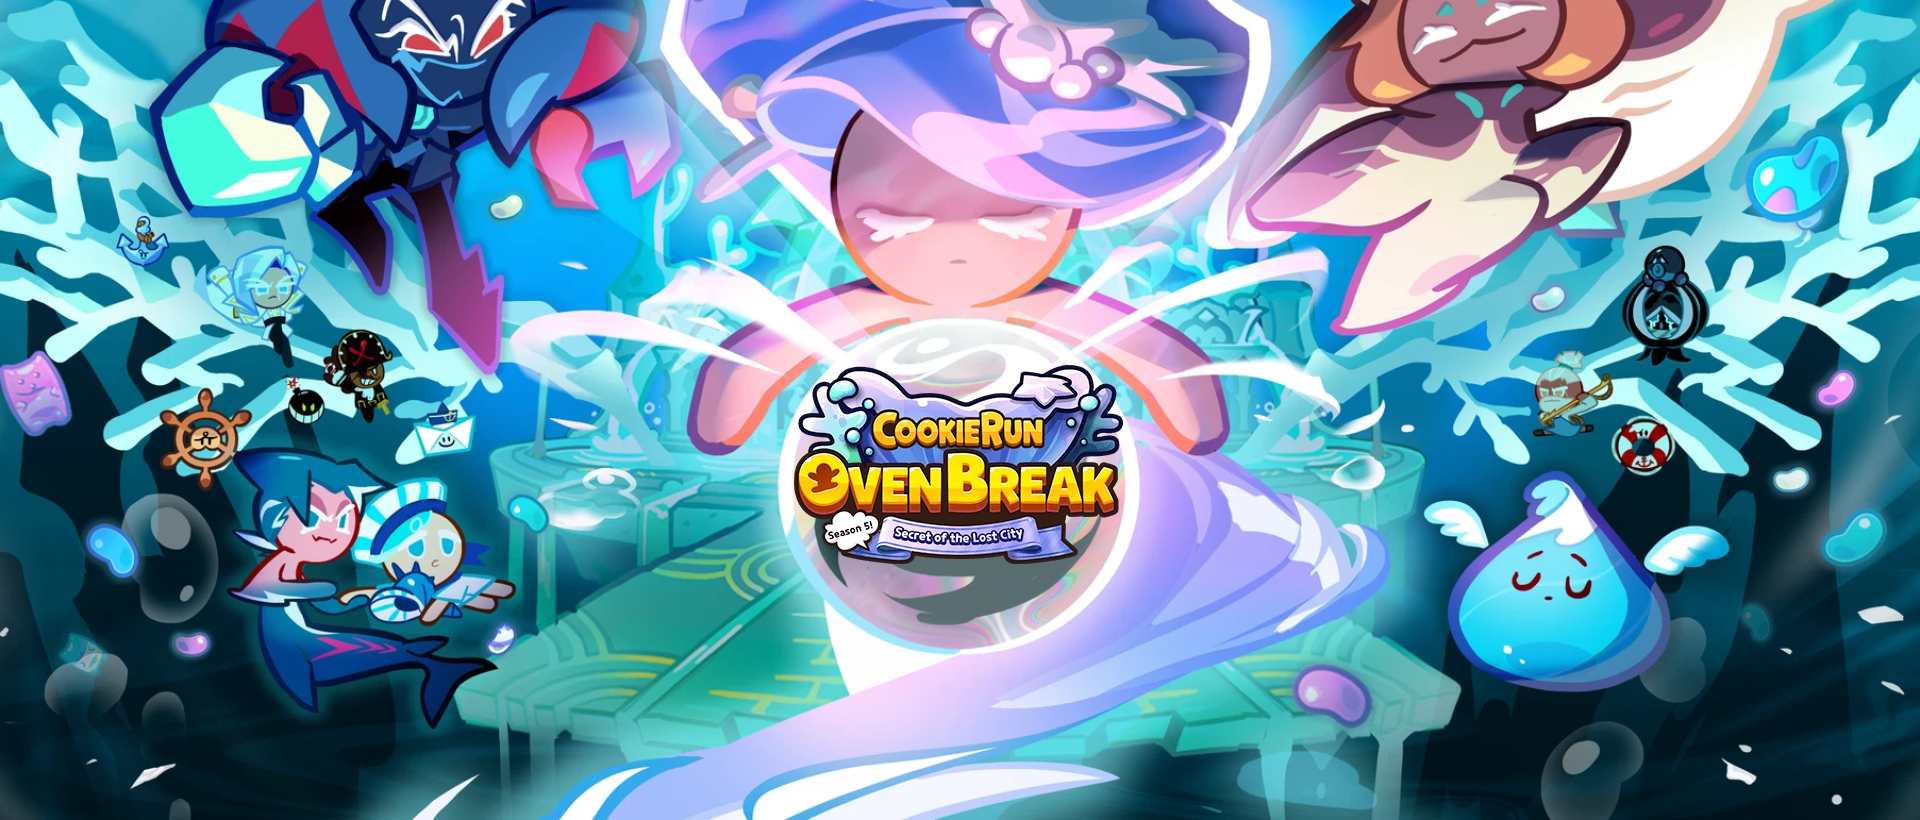 Download & Play Cookie Run: OvenBreak on PC & Mac with NoxPlayer (Emulator)